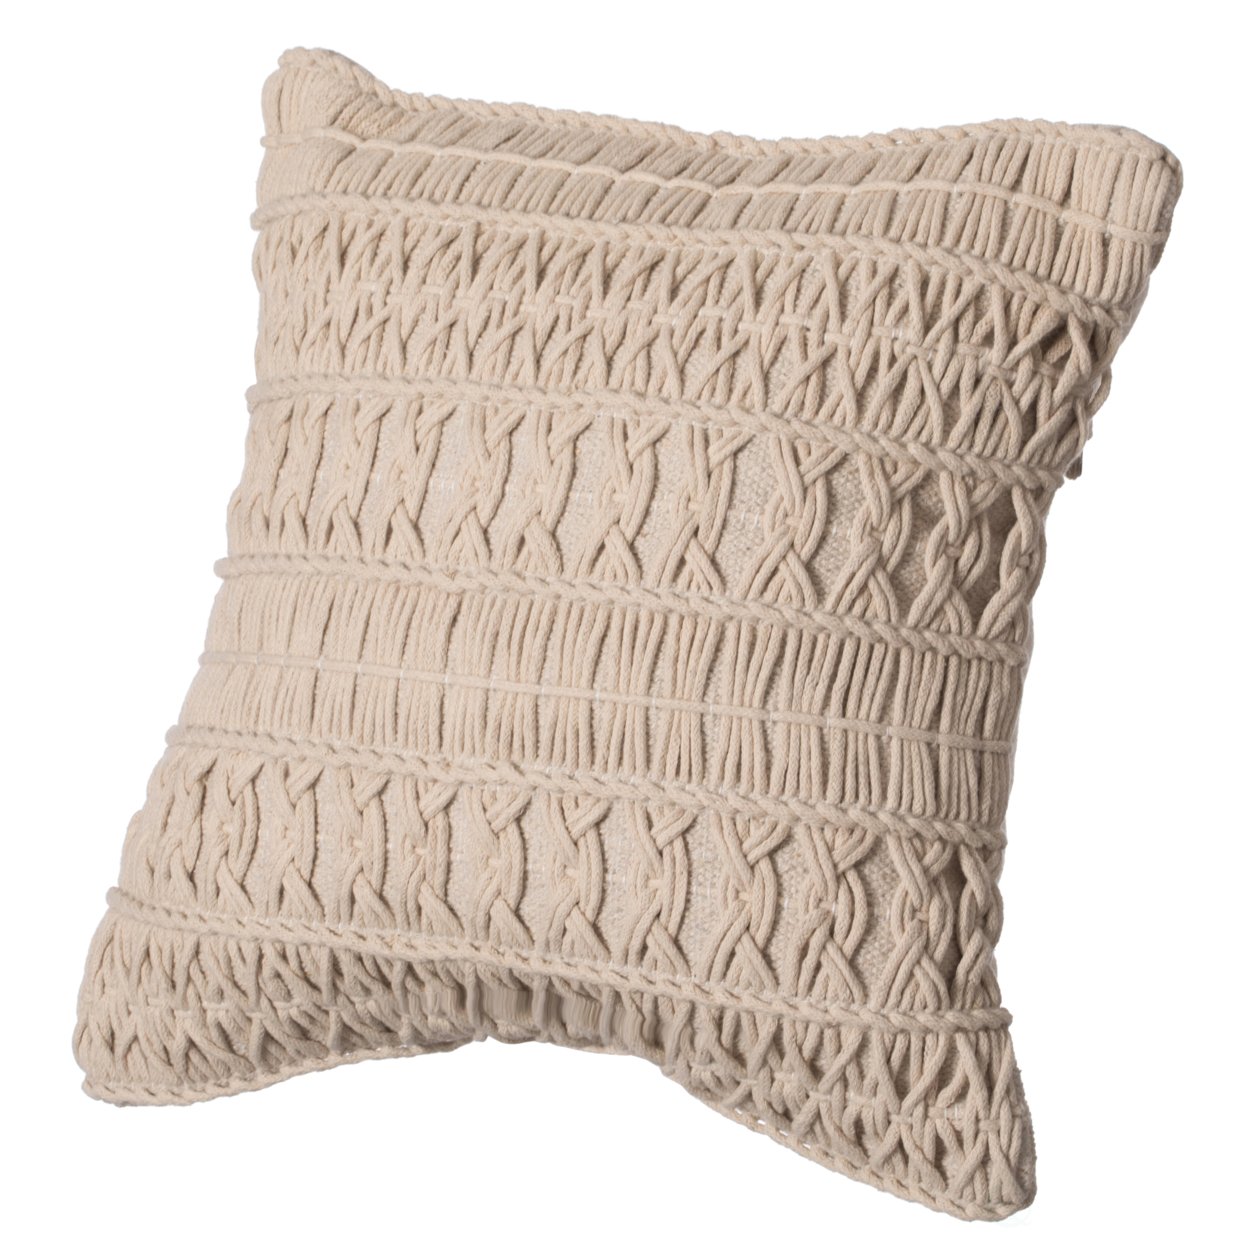 16" Handwoven Cotton Throw Pillow Cover with Layered Random String Pattern - pillowcase only